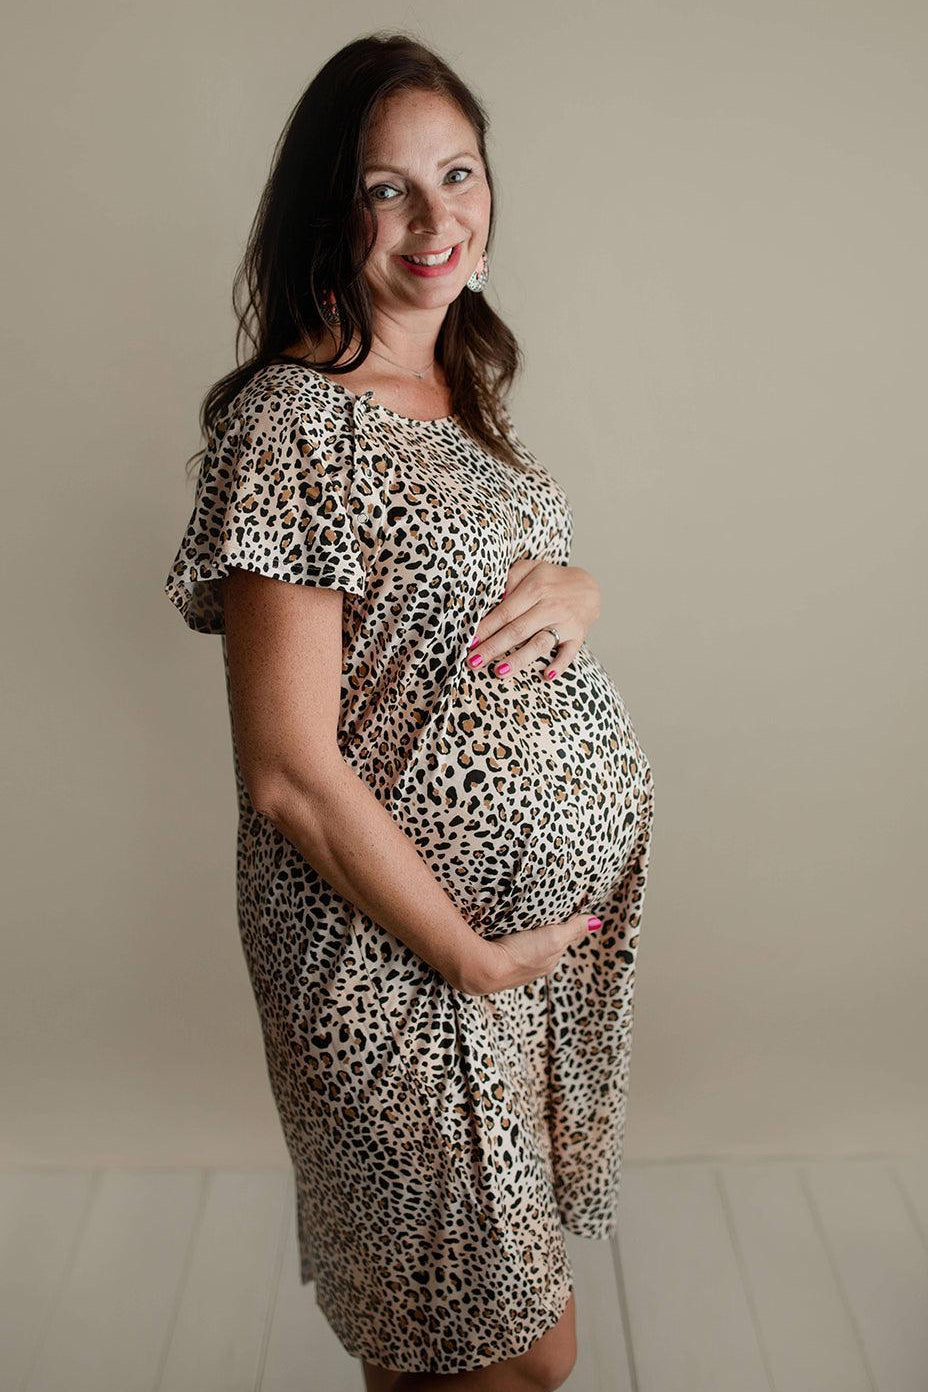 Leopard Labor & Delivery Gown - Milk & Baby 